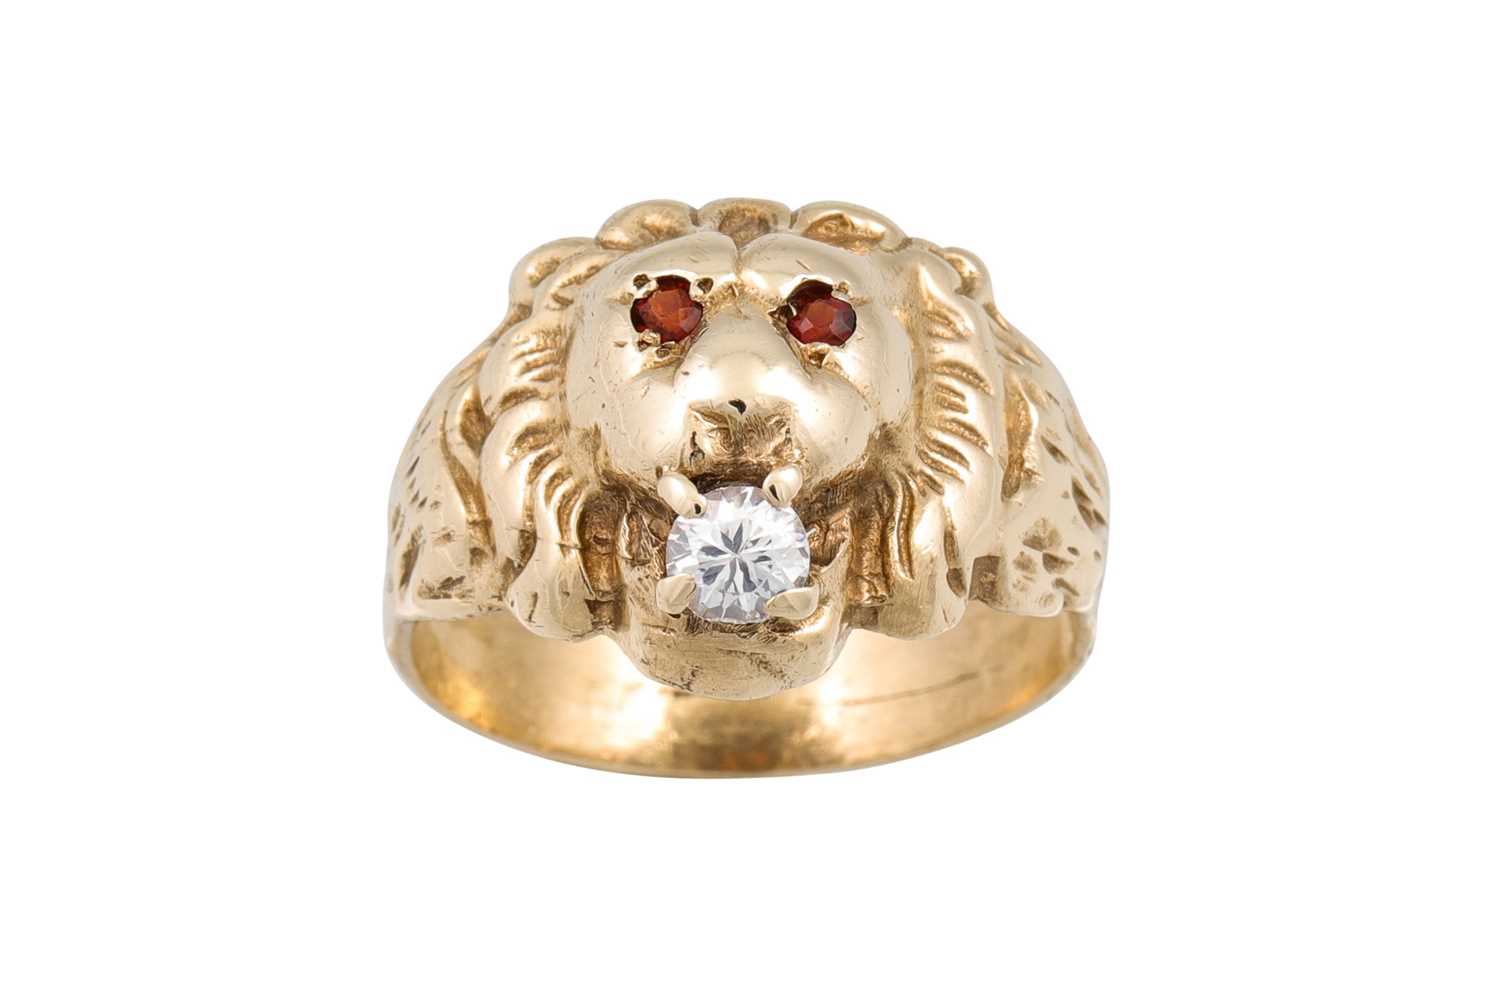 Lot 217 - A 9CT GOLD RING, modelled as a lion's head